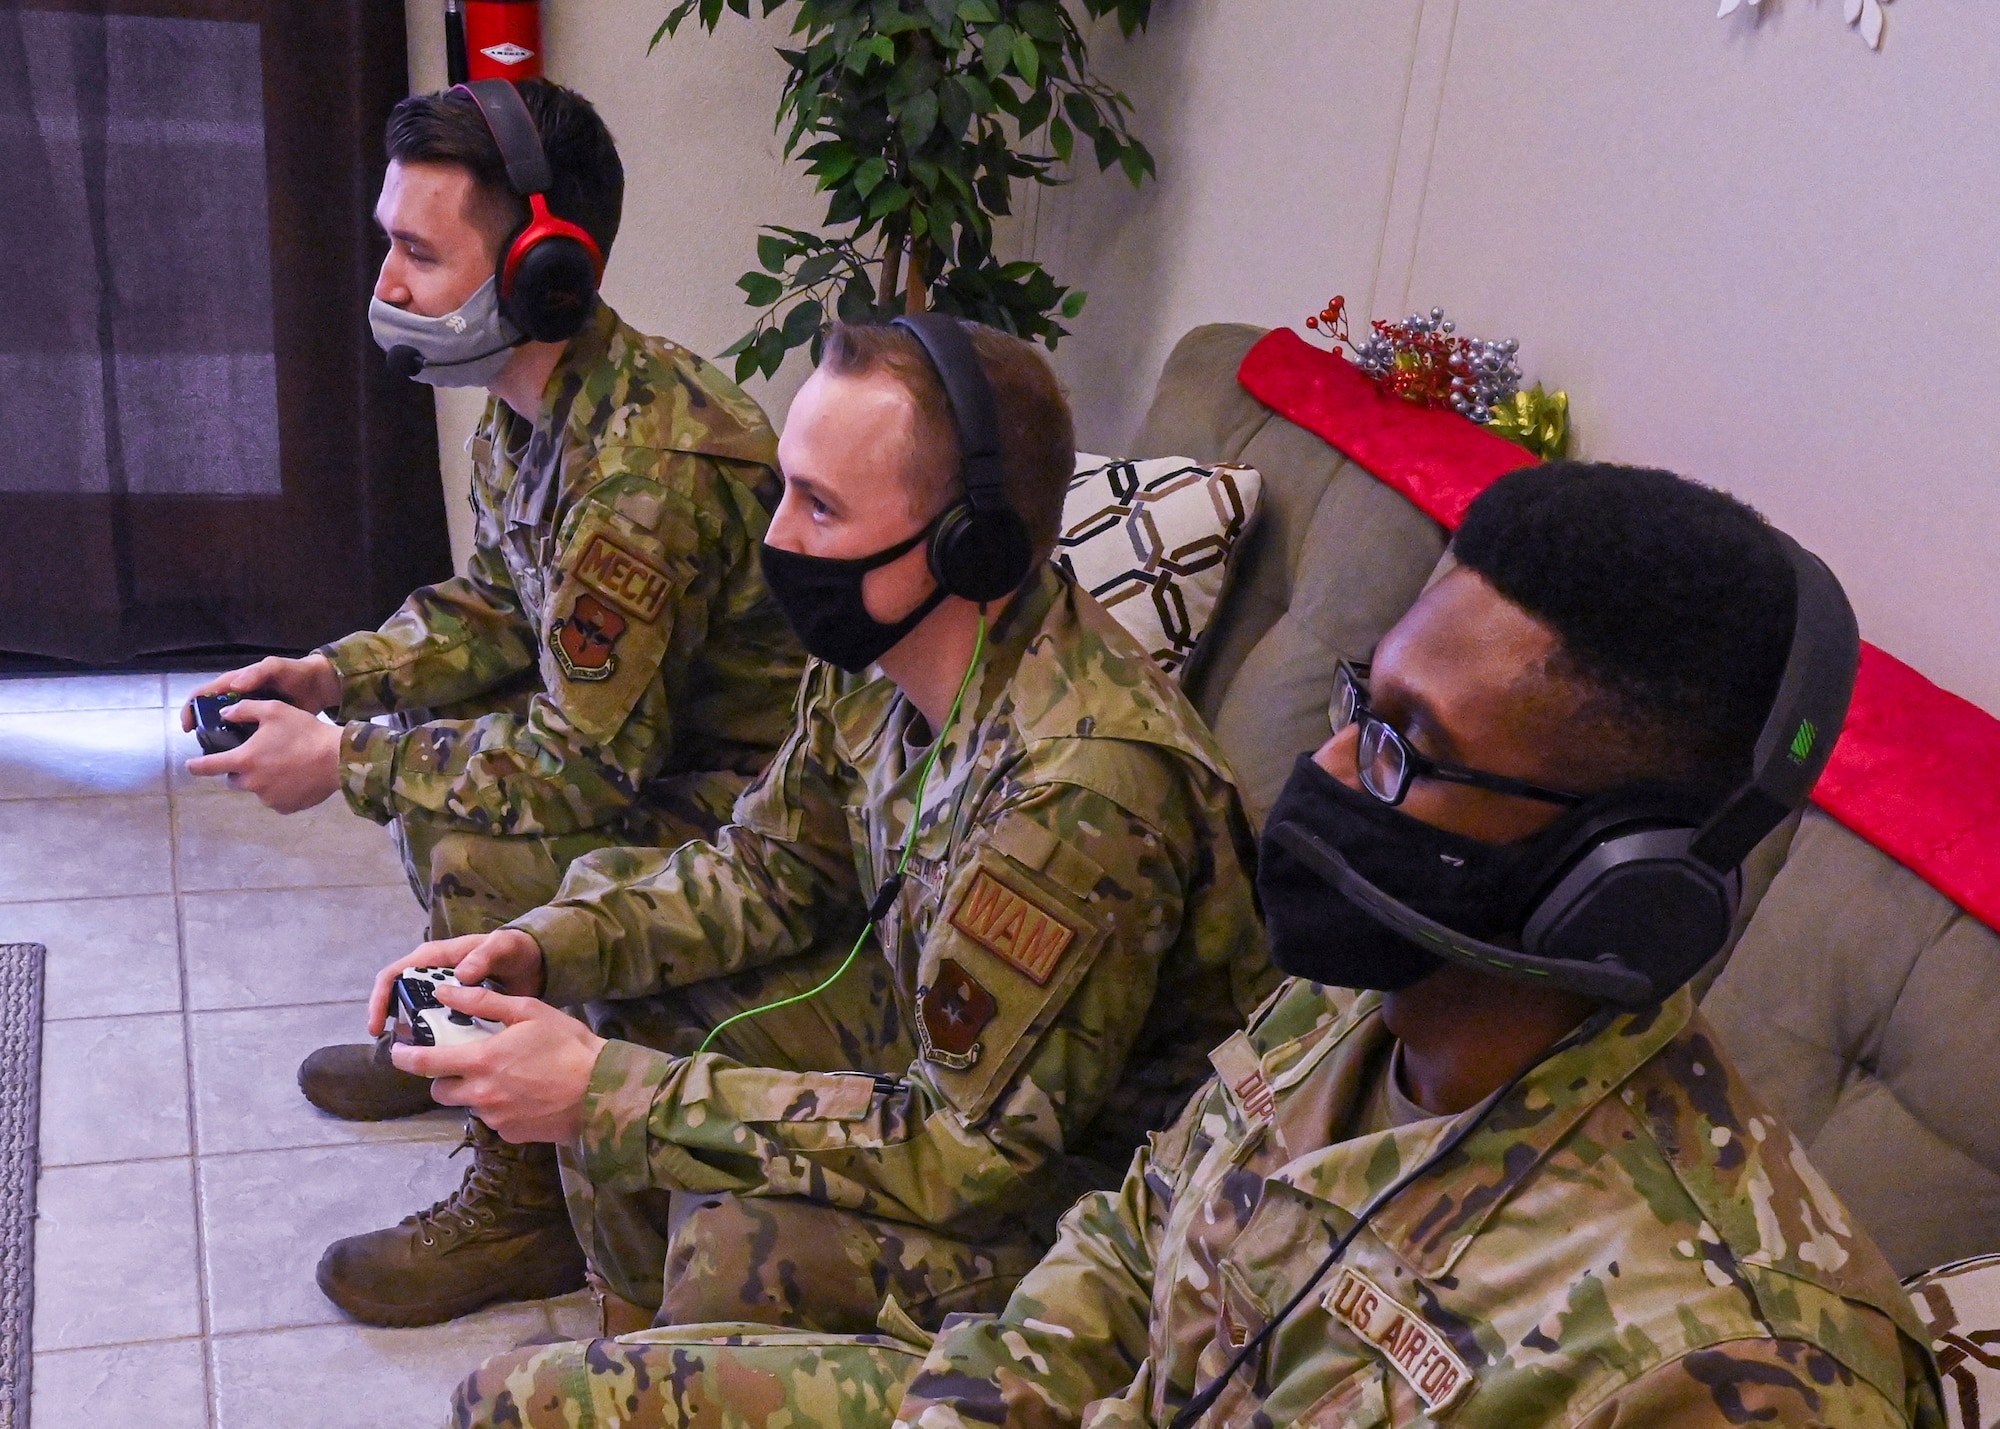 (Left to right) Senior Airman Isaac Garcia, 308th Aircraft Maintenance Unit assistant dedicated crew chief, Master Sgt. Joseph Blahut, 56th Maintenance Group wing avionics manager, and Senior Airman Jeffrey Dupont, 308th AMU autonomic logistics information system expeditor, play a video game together Dec. 14, 2021 at Luke Air Force Base, Arizona. Their team, “Joint Strike Fighters,” is competing in the Department of the Air Force Gaming League’s Apex Legends Tournament, which aims to bolster morale within participating units and build connections beyond Luke AFB. (U.S. Air Force photo by Senior Airman David Busby.)